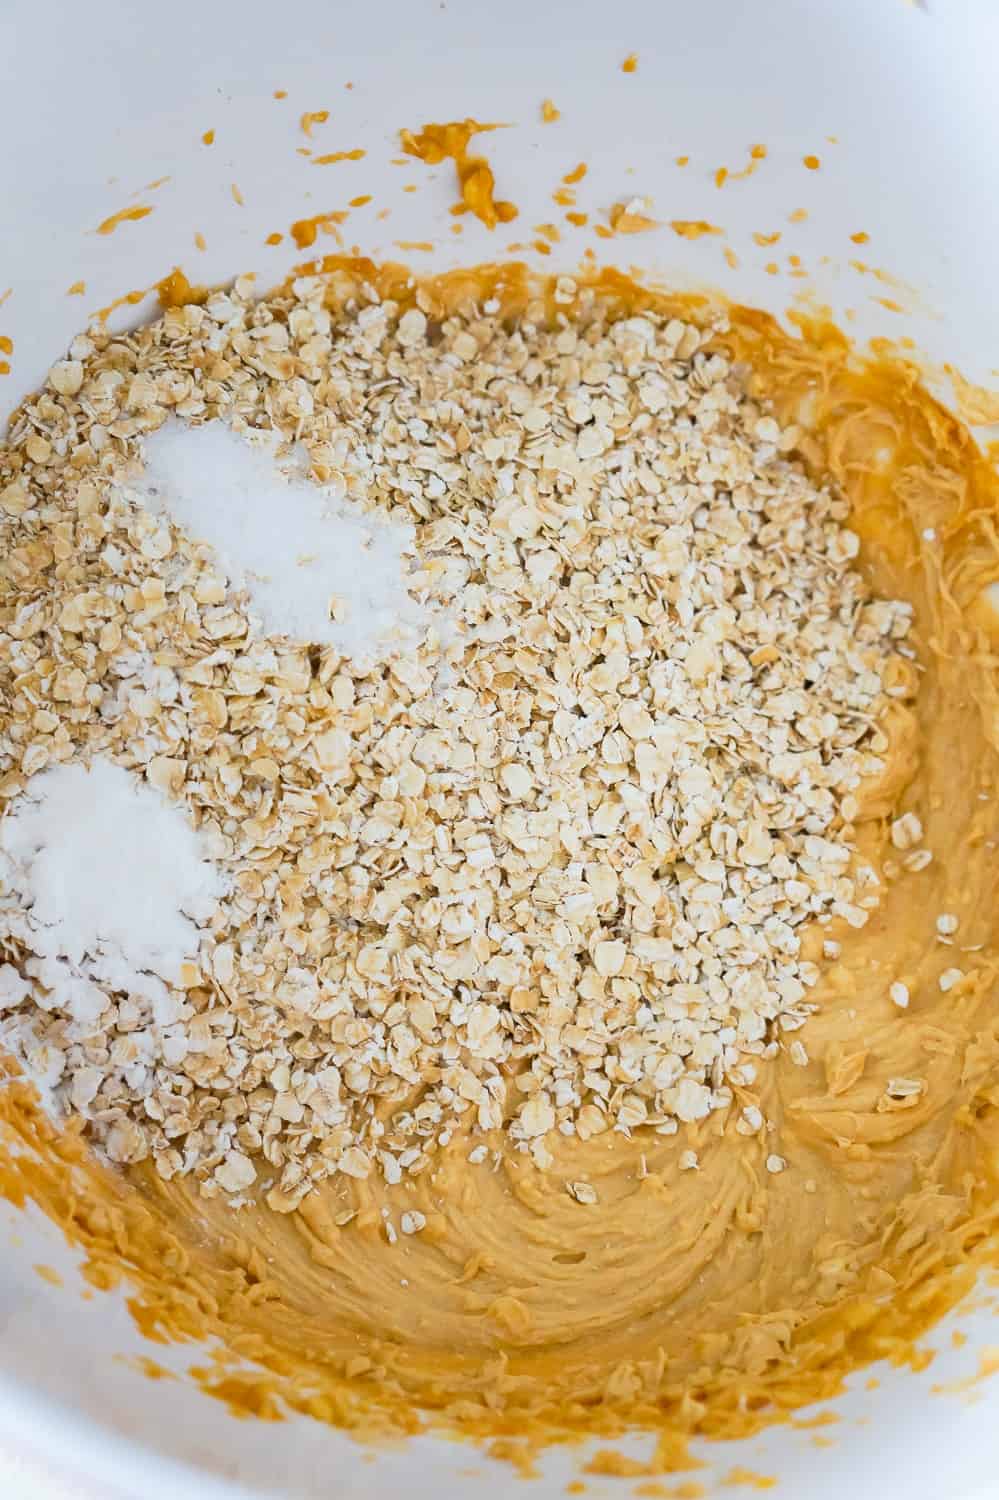 quick oats, baking powder and salt on top of a peanut butter mixture in a mixing bowl